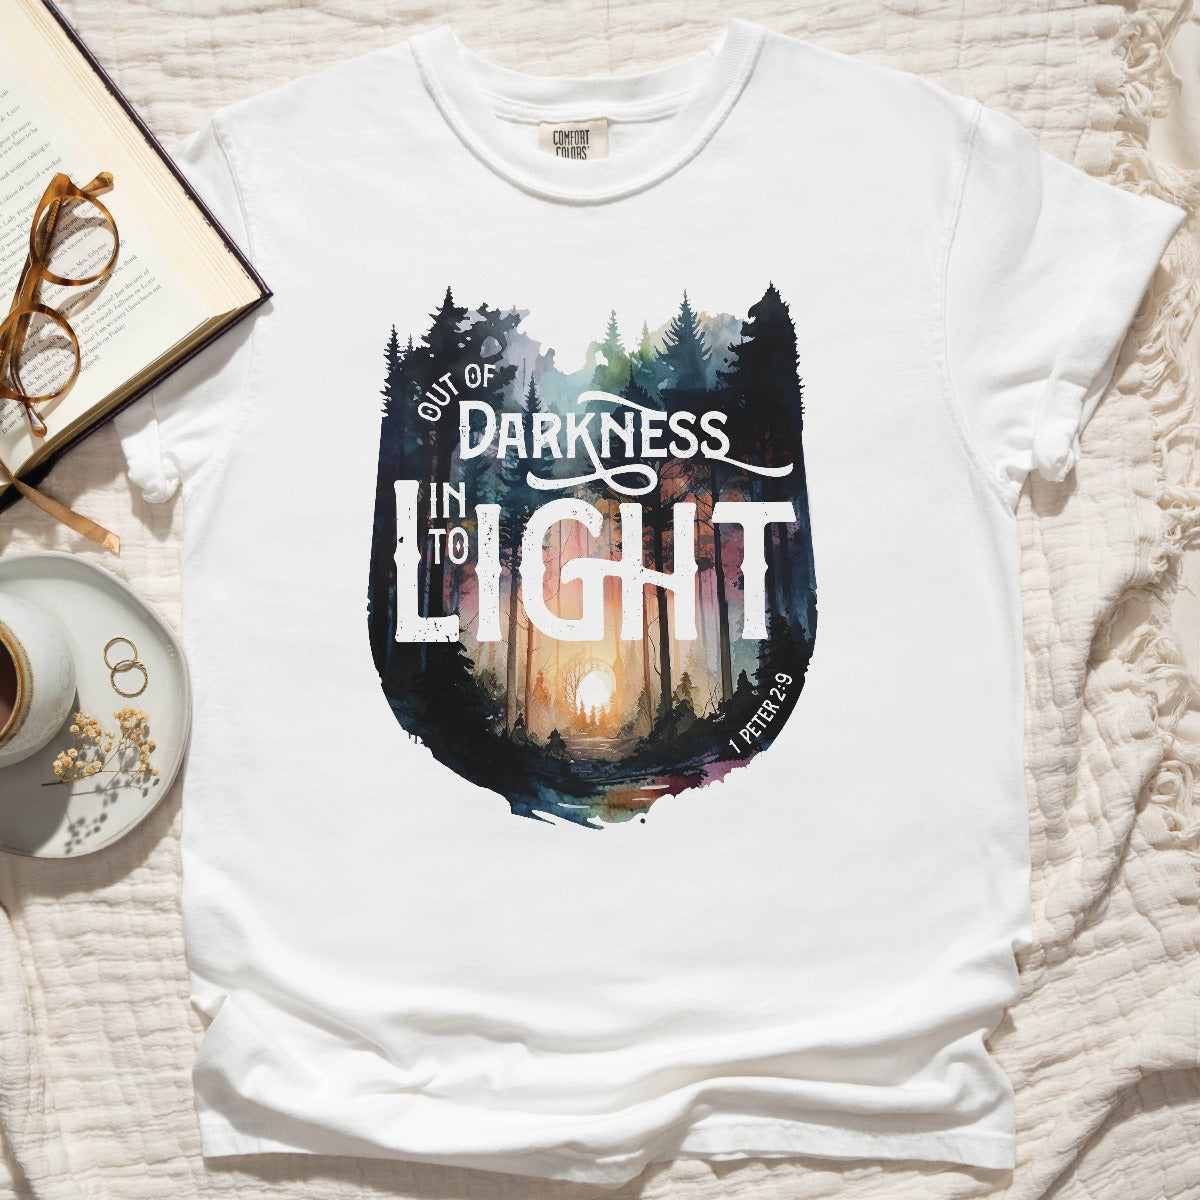 White Comfort Colors C1717 unisex faith-based Christian t-shirt with "Out of Darkness, Into Light" 1 Peter 2:9 bible verse and watercolor moody forest trees outdoor scene, designed for men and women